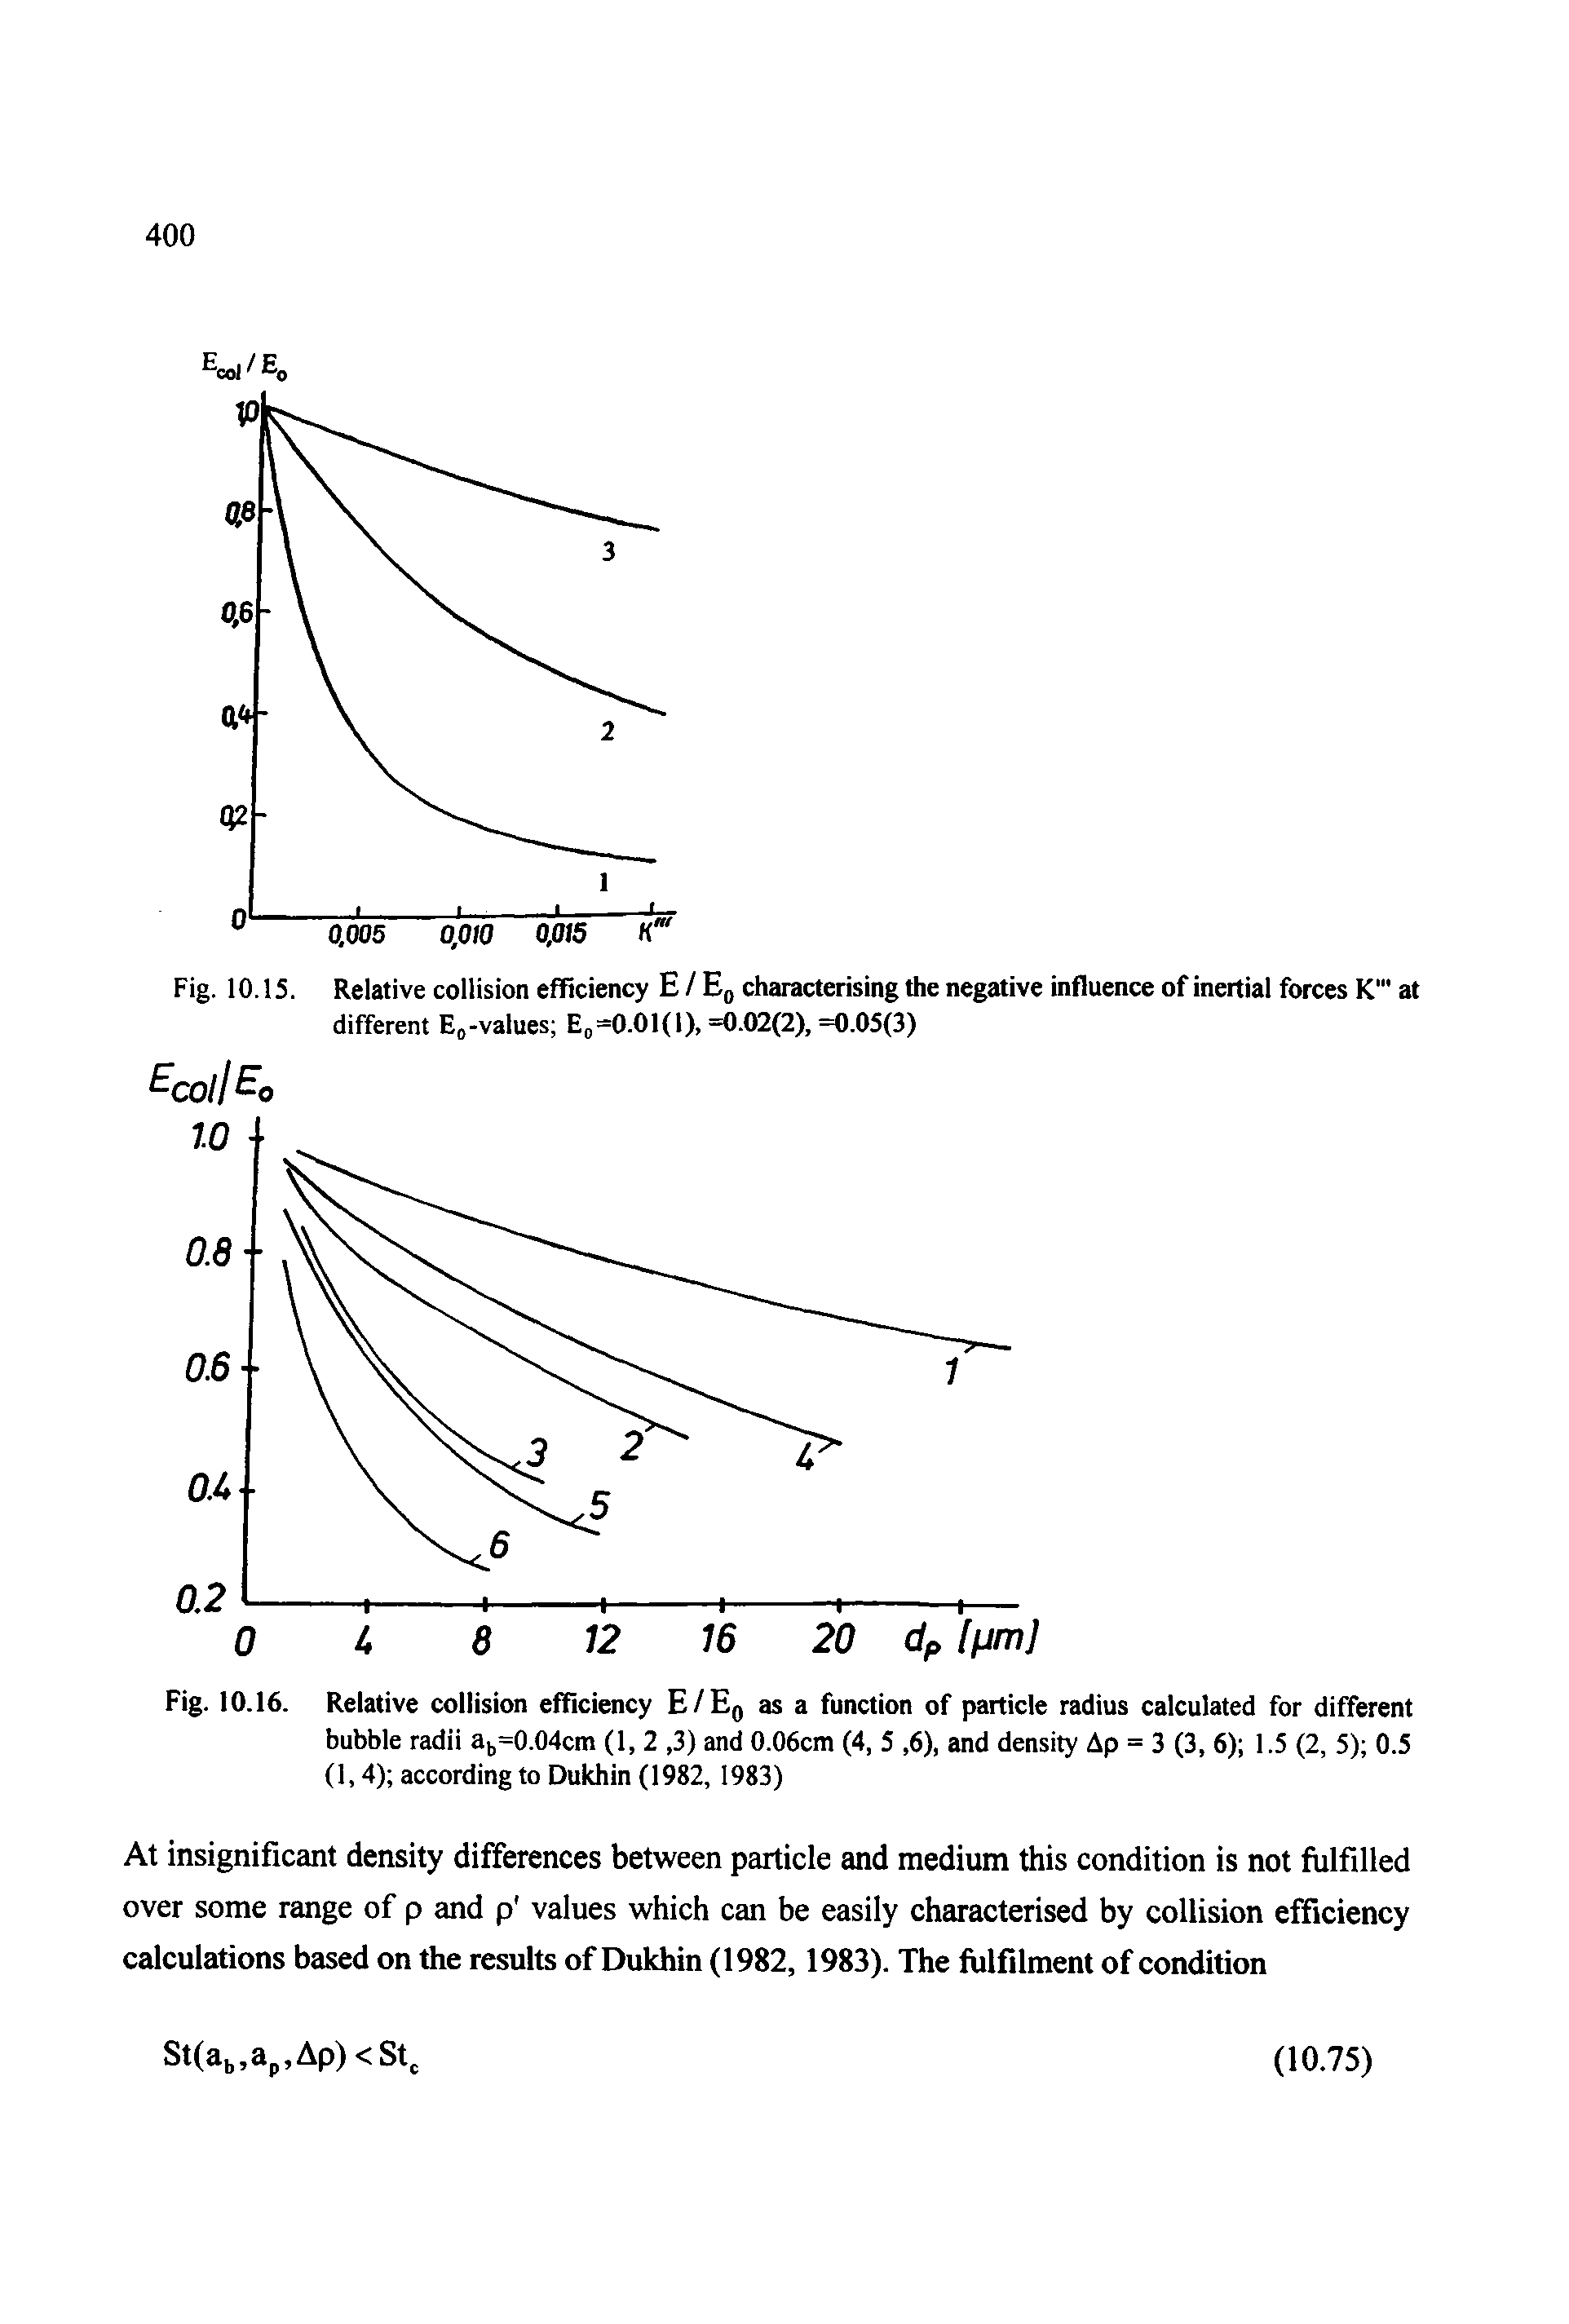 Fig. 10.15. Relative collision efficiency E / Eq characterising the negative influence of inertial forces K " at different E,-values E =0.01(l), =0.02(2), =0.05(3)...